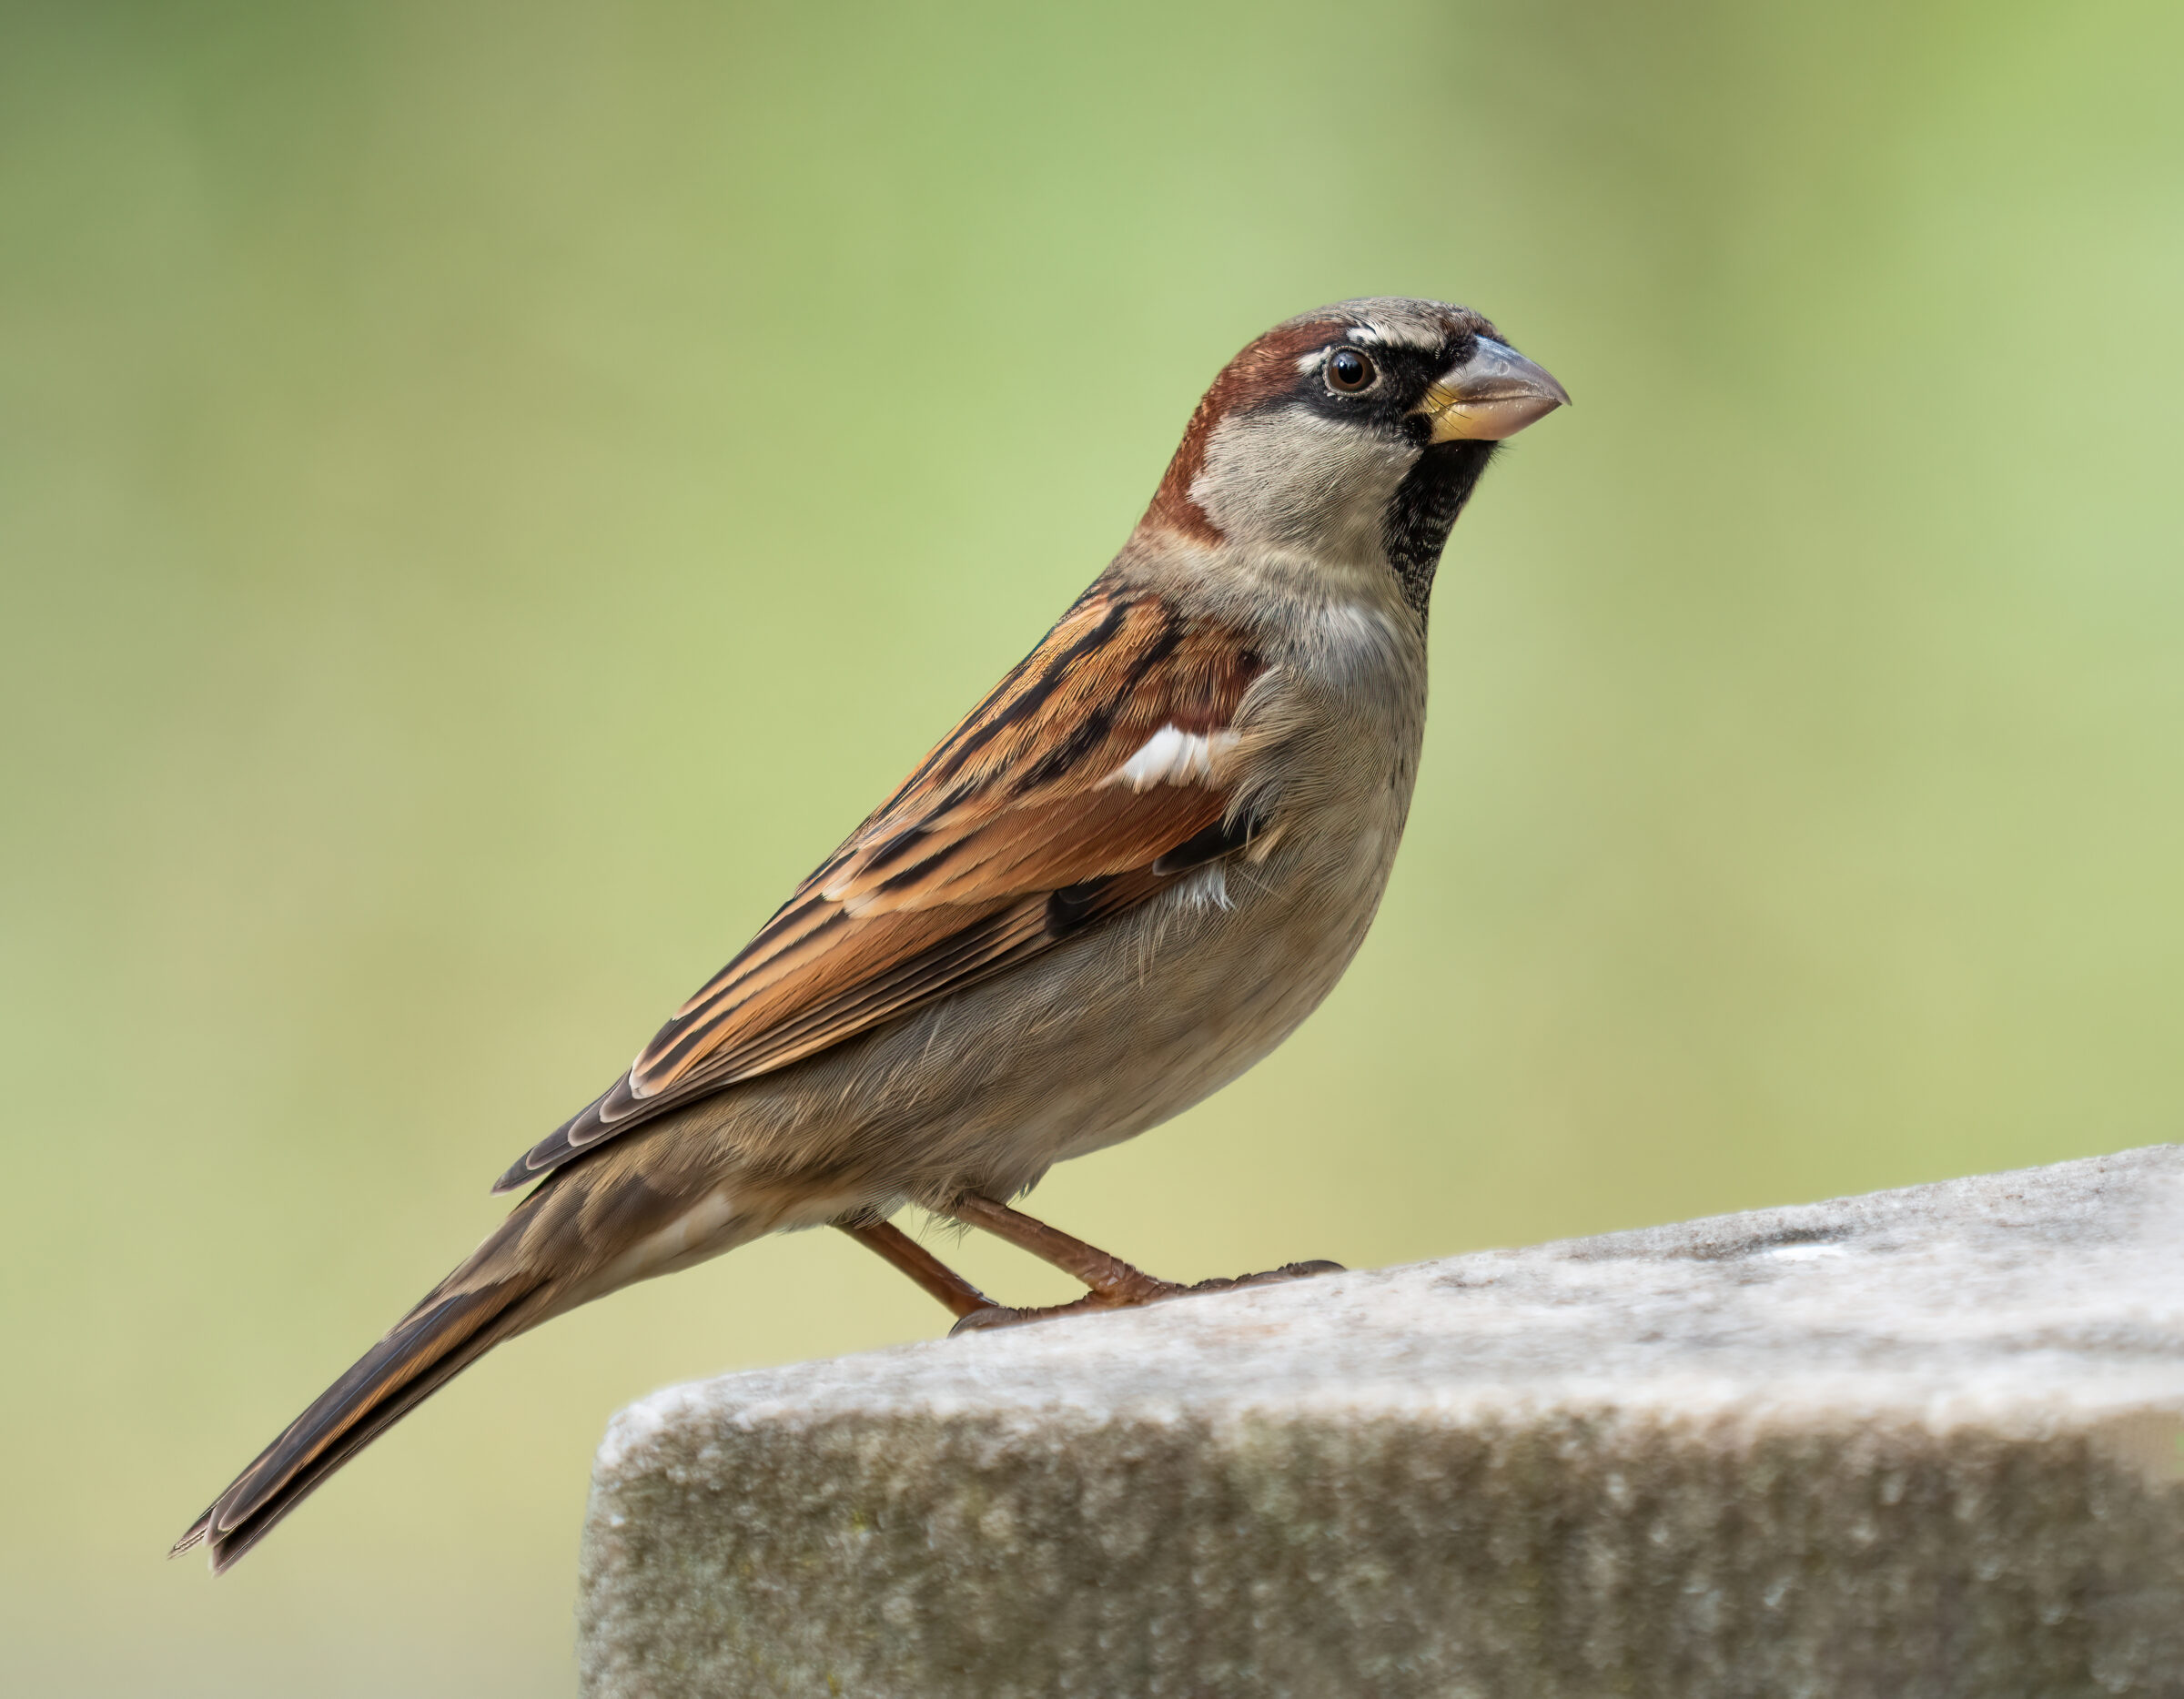 This picture shows a typical house sparrow which may build nests in holes that exist in your home or on your solar panels in Calgary and Alberta.